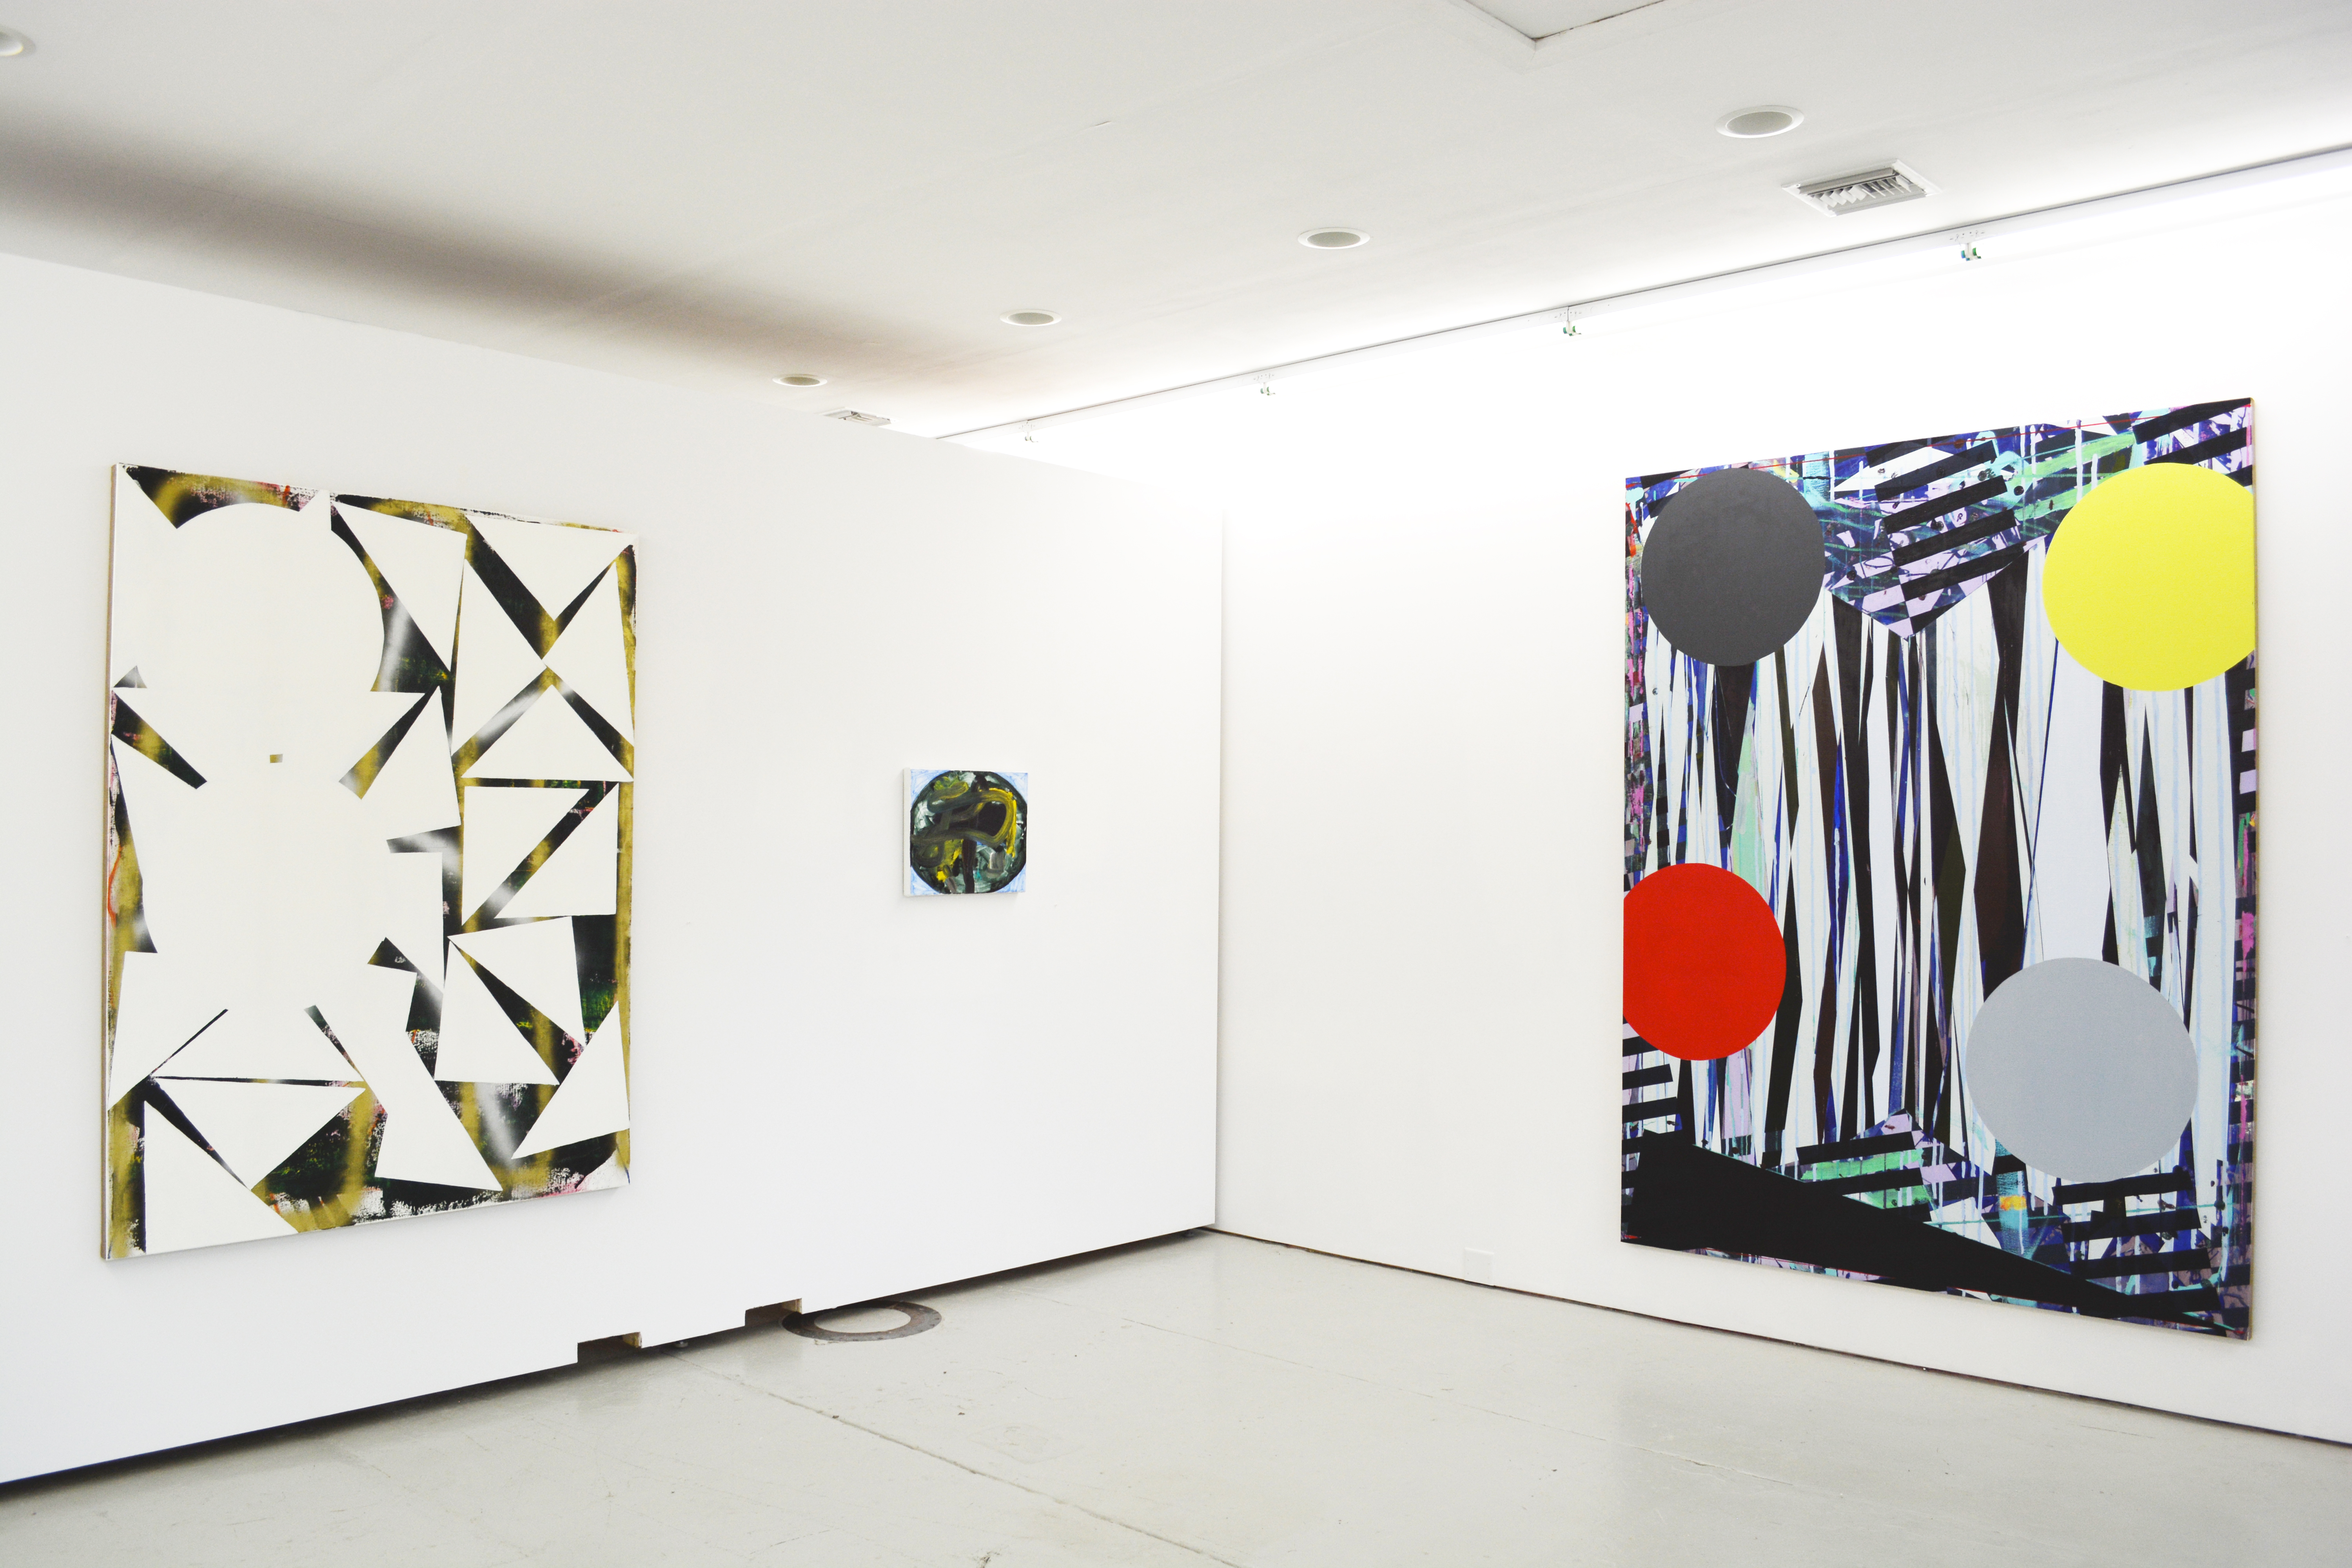 Jered Sprecher, installation shot of "The Hollow That Echoes (left to right):<i>Ghost</i>, 2011, oil and spray paint on linen, 72 by 54 inches;  <i>Platter</i>, 2013, oil on linen, 16 by 20 inches; &amp; <i>Beyonder</i>, 2010, oil on linen, 96 by 72 inches. 